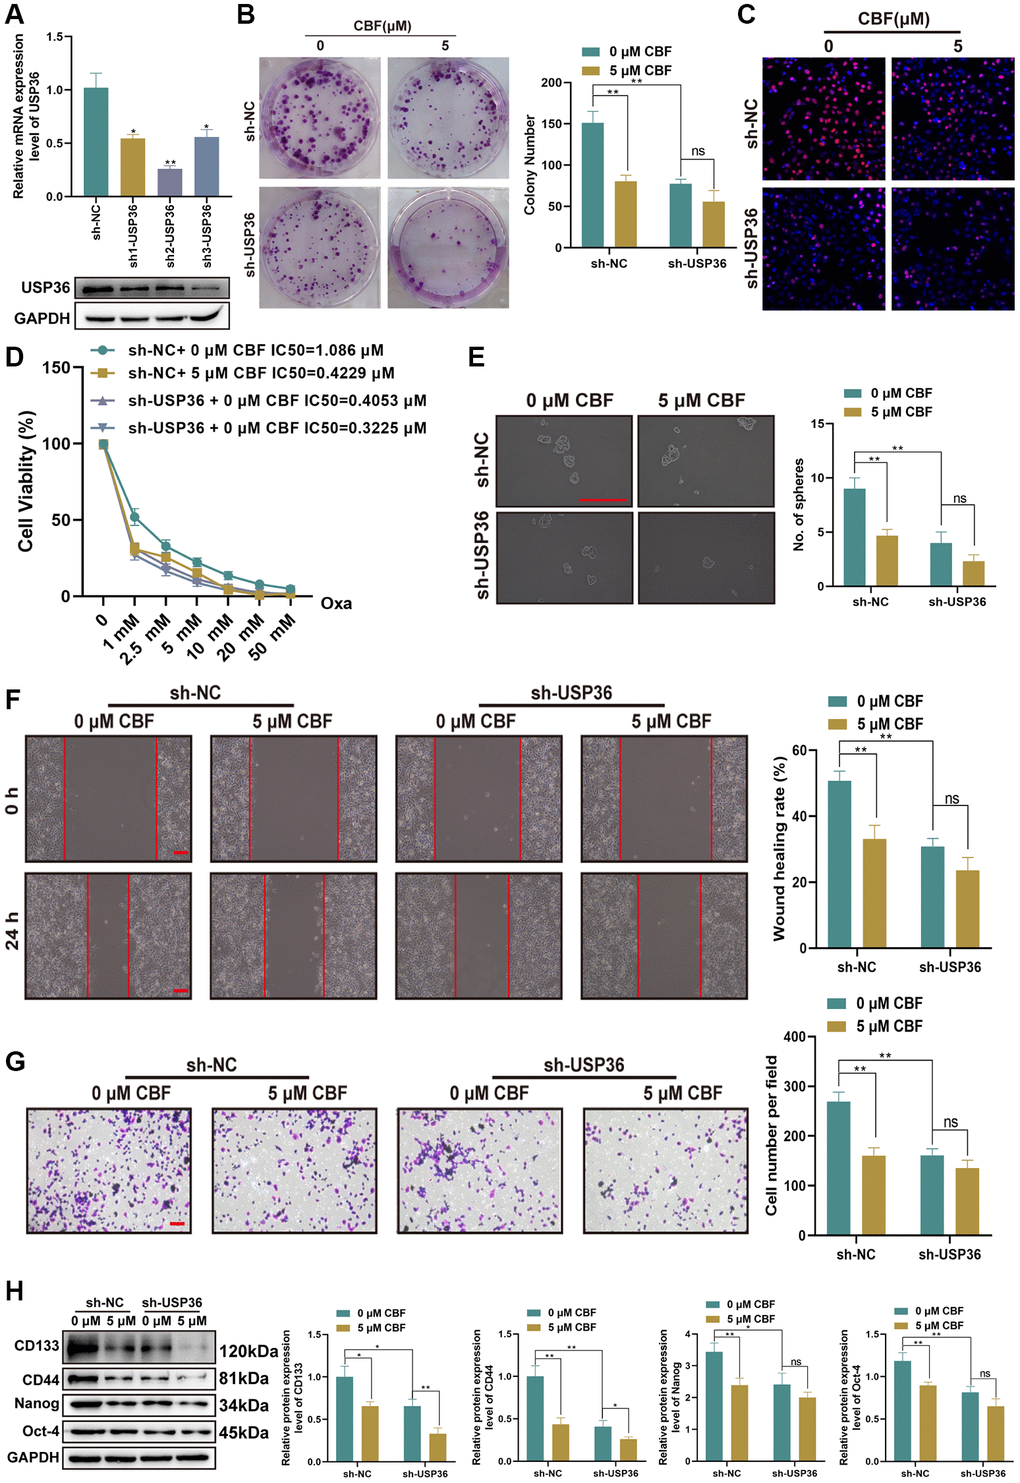 Suppressive effect of CBF on malignant phenotypes of colon cancer cells is mediated by USP36. (A) The mRNA (top) and protein (button) expression levels of USP36 in HCT116 cells were respectively detected by RT-PCR and western blot to validate the transfection efficiency of sh-USP36. (B, C) The cell proliferation was detected by colony formation (B) and Edu staining (C, Scale bar = 100 μm) assays. (D) The cell viability was detected by CCK-8 assay after a series of concentrations of Oxa for the determination of IC50 value to Oxa. (E) The cellular self-renewal capacity was investigated by sphere formation assay (Scale bar=100 μm). (F) The protein expression of cancer stem cell-related markers (CD133, CD44, Nanog, and Oct-4) was detected by western blot. (G) The cell migration was detected by wound healing assay (Scale bar = 100 μm). (H) The cell invasion was observed by Transwell assay (Scale bar = 100 μm). *p **p 